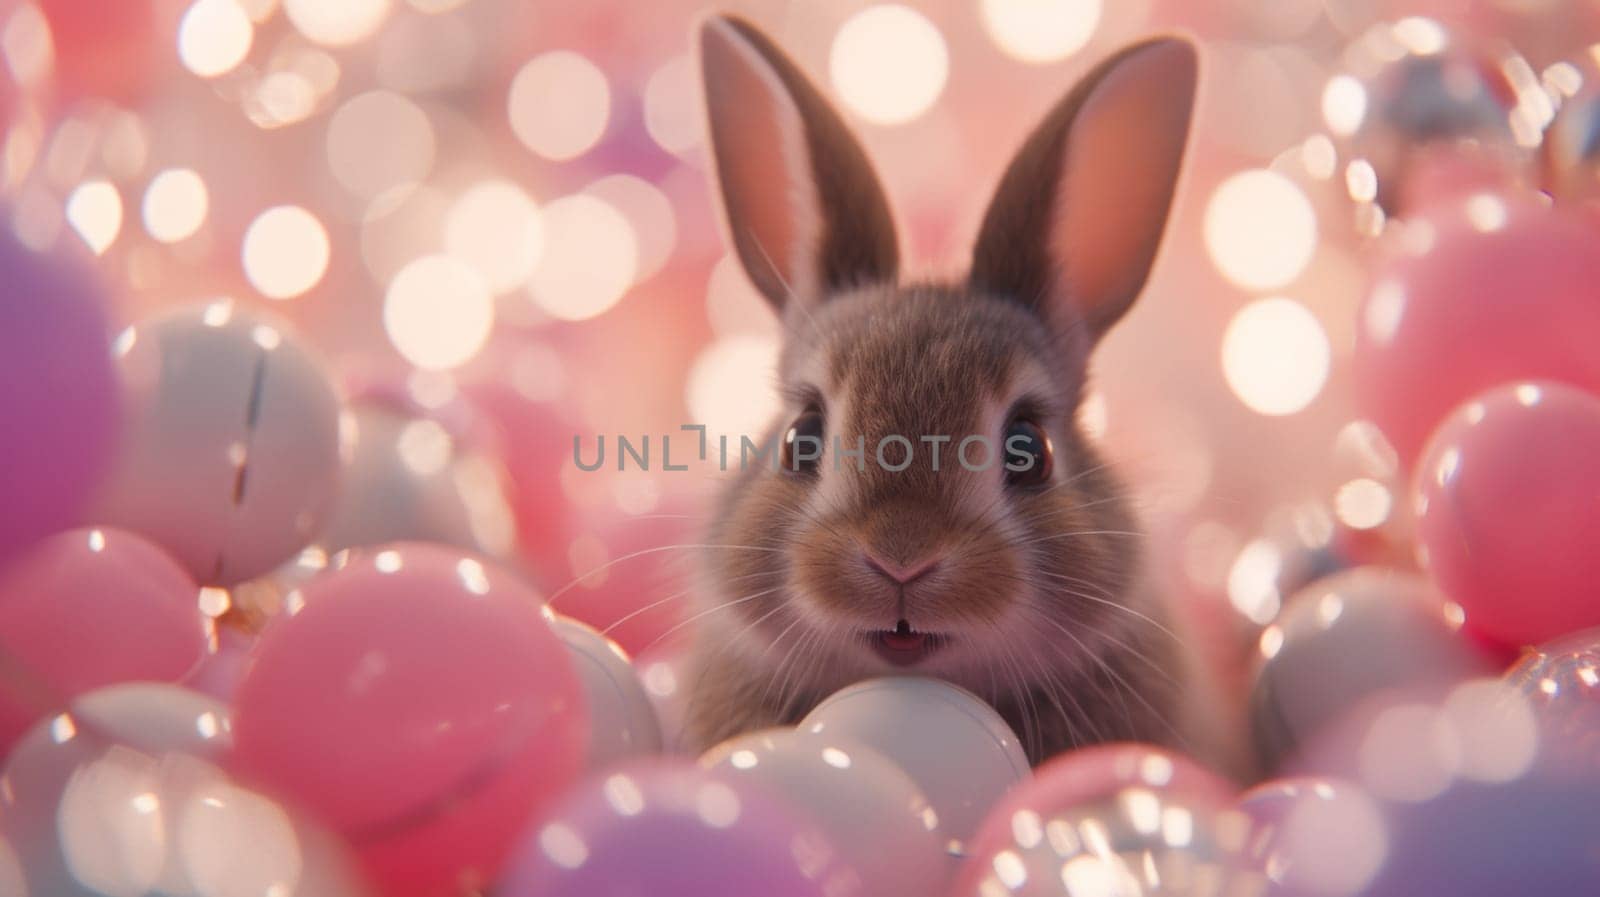 A rabbit sitting in a bunch of pink and white balls